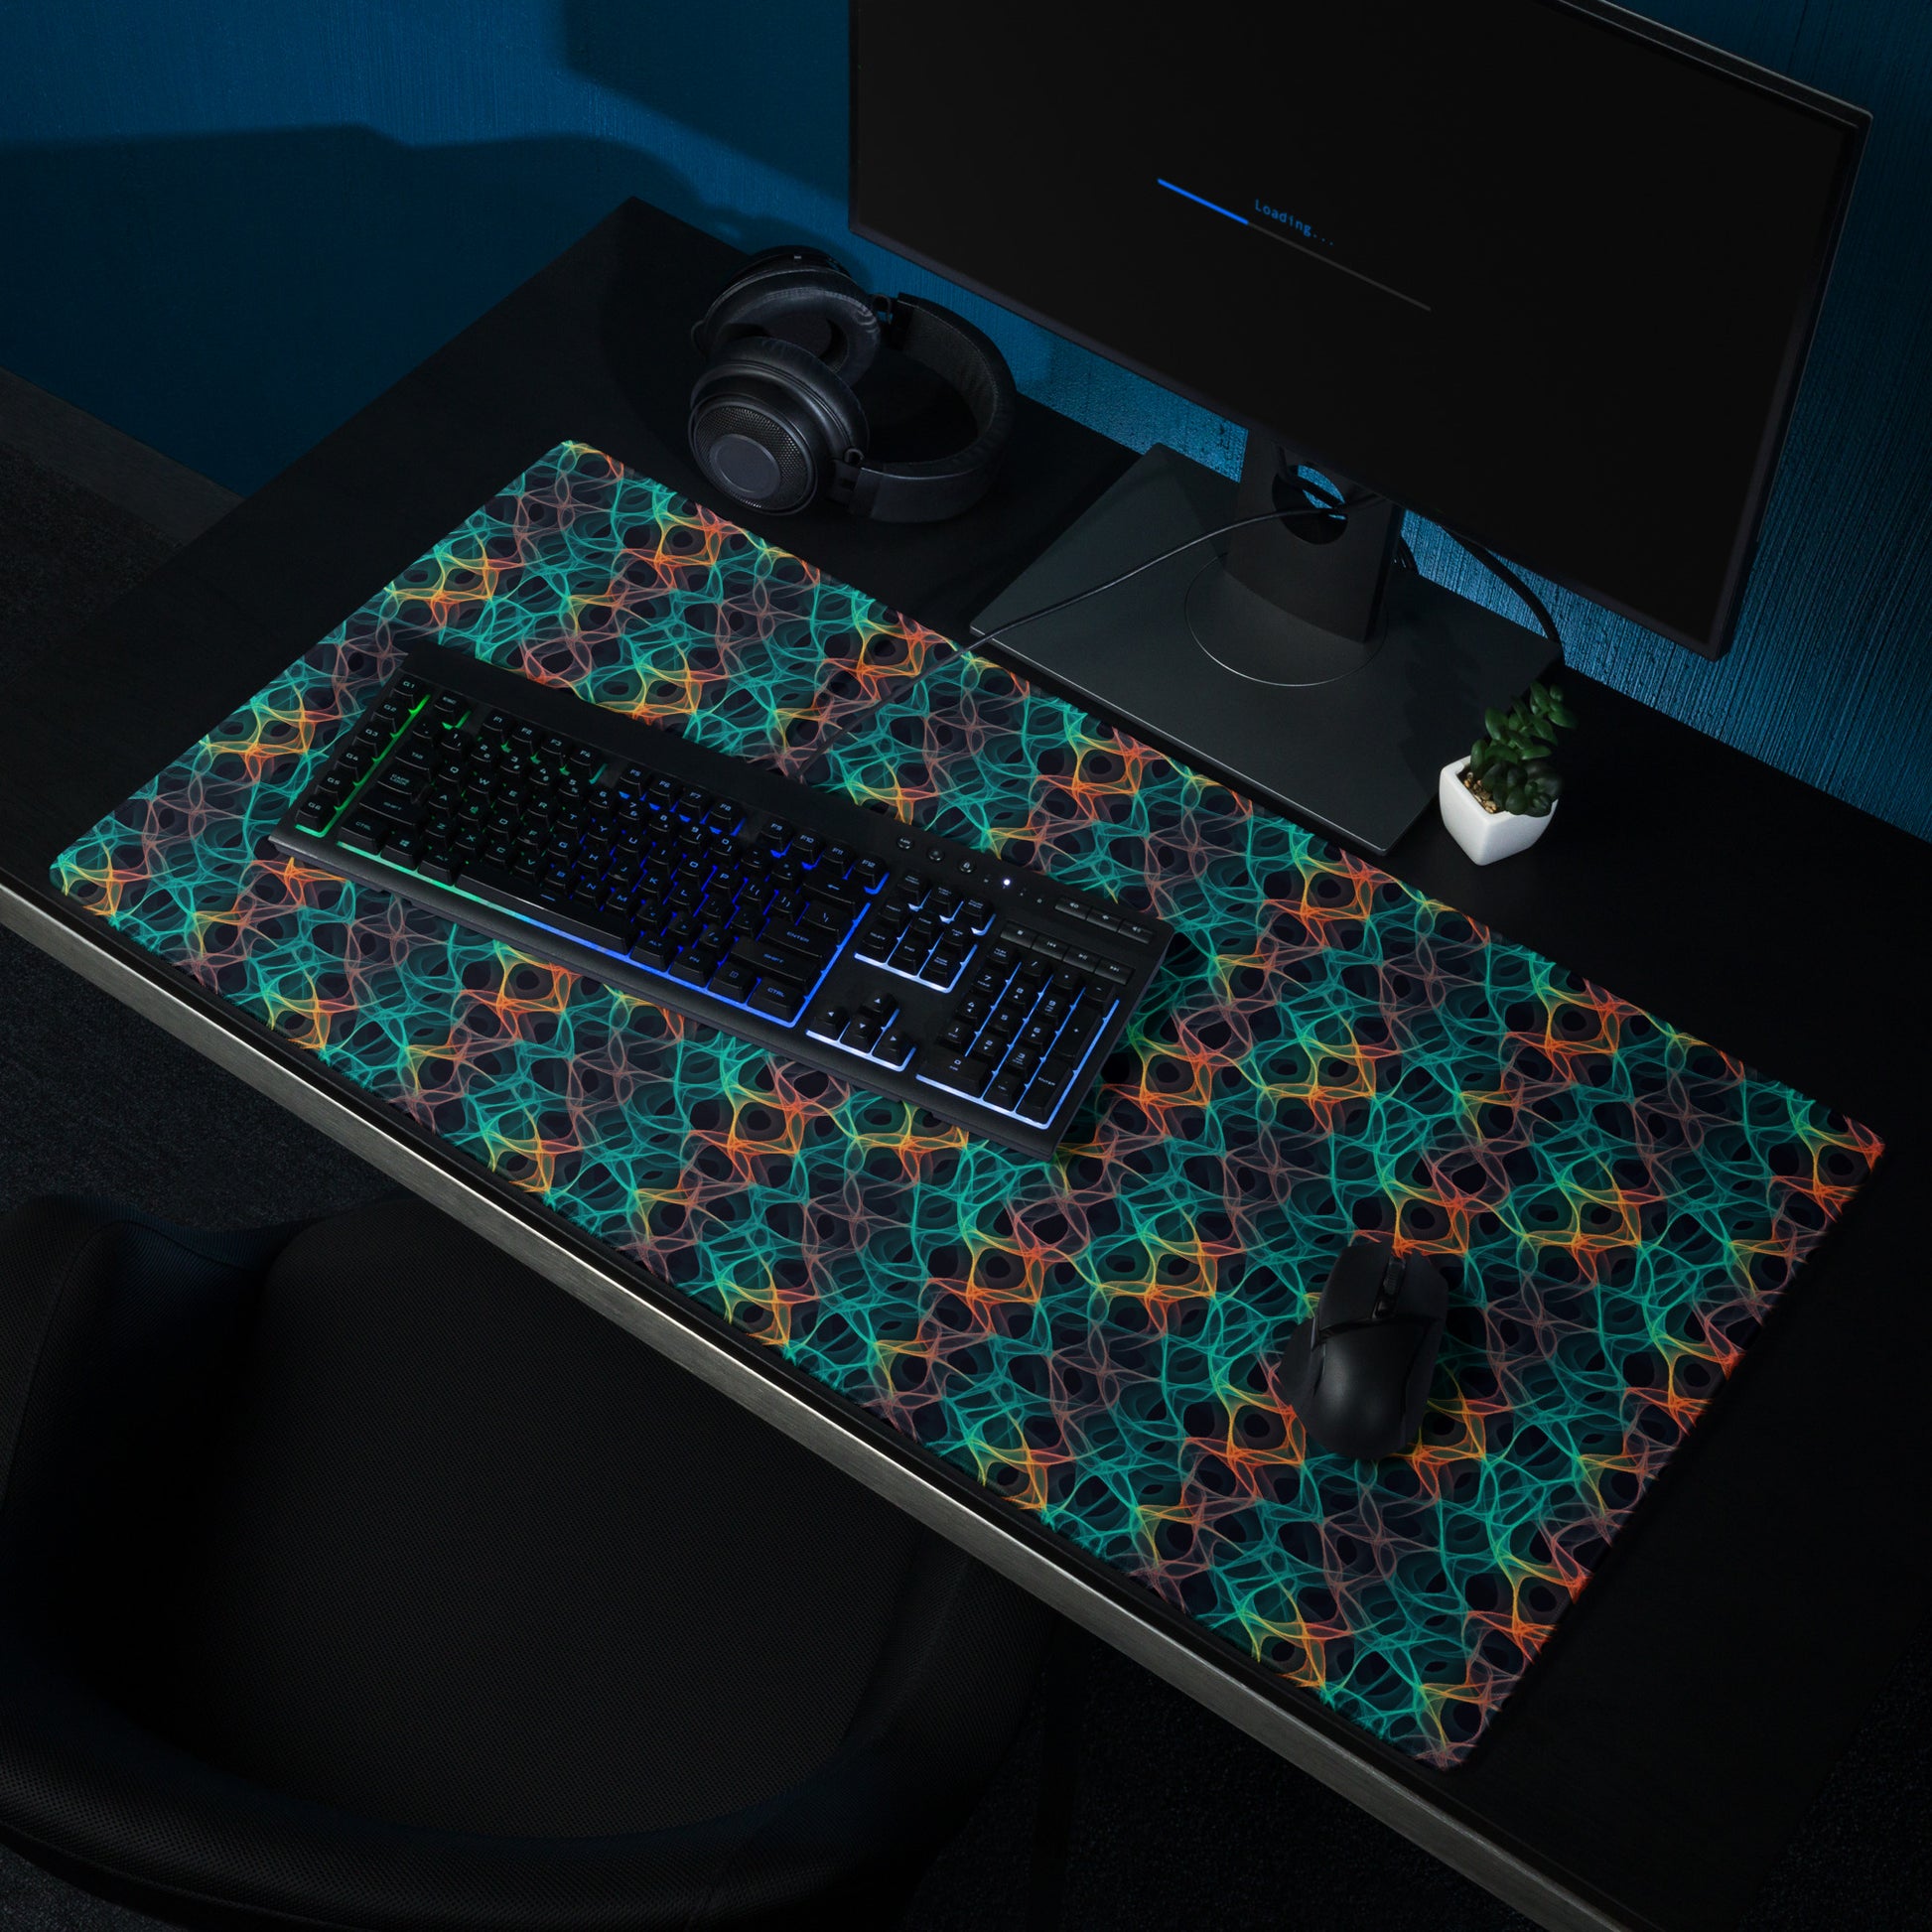 A 36" x 18" desk pad with an abstract pattern resembling a cell structure on it shown on a desk setup. Rainbow in color.